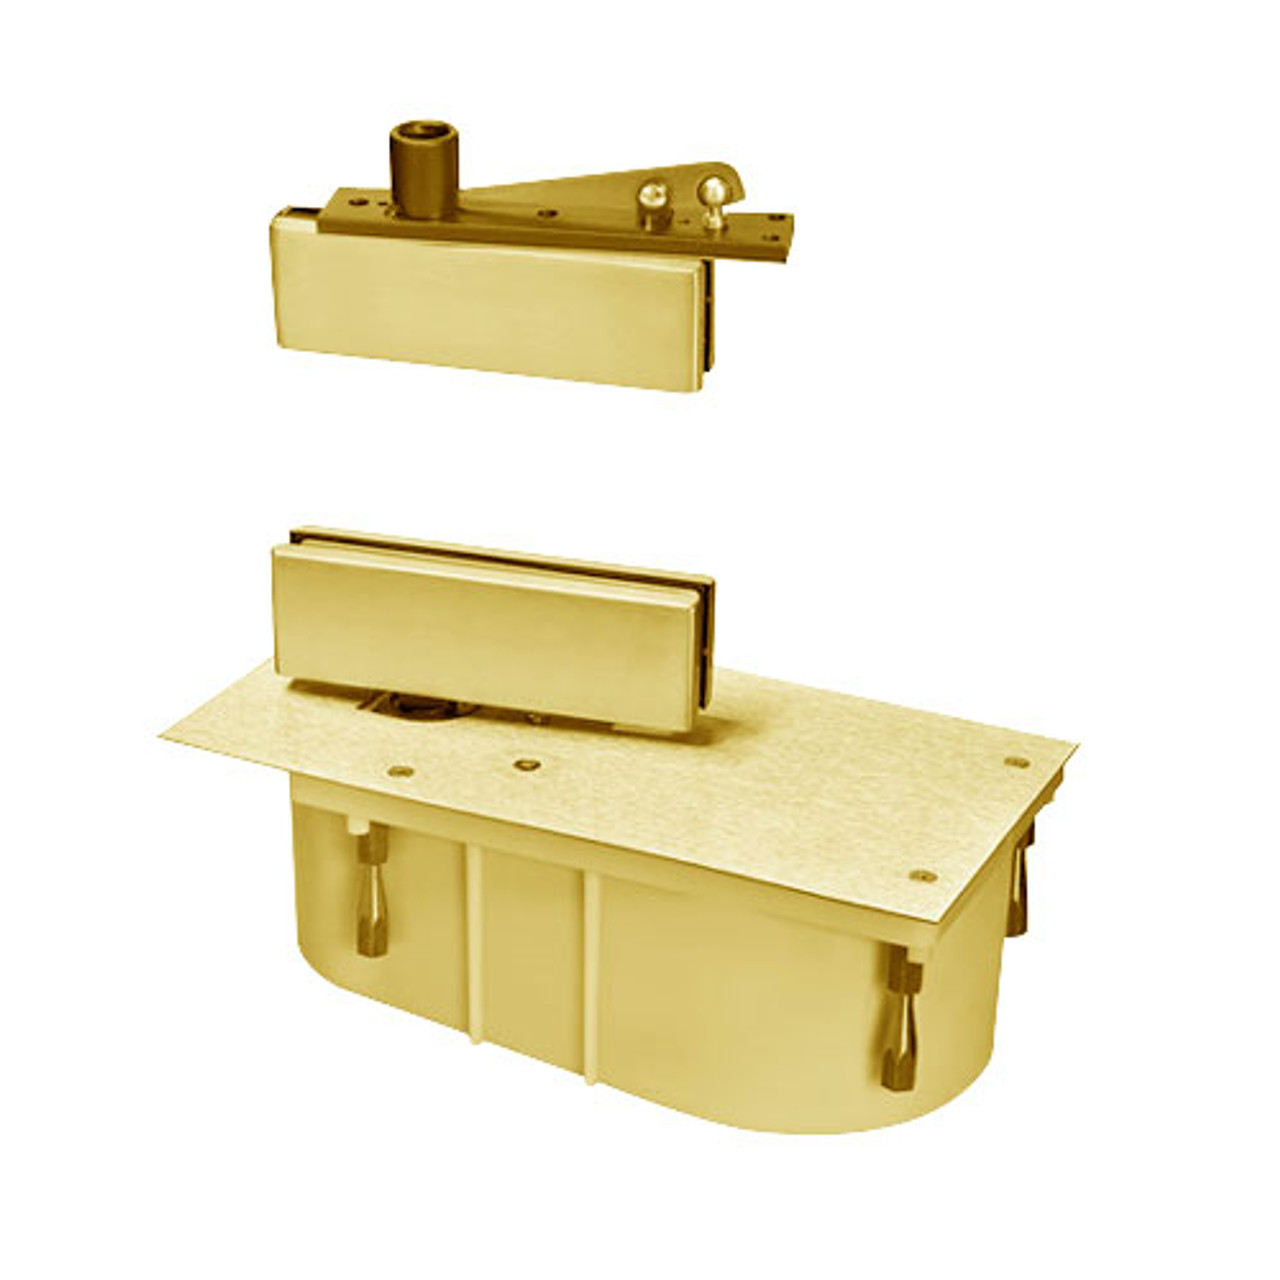 428-85S-RH-605 Rixson 428 Series Heavy Duty Single Acting Center Hung Floor Closer with Patch Fittings in Bright Brass Finish